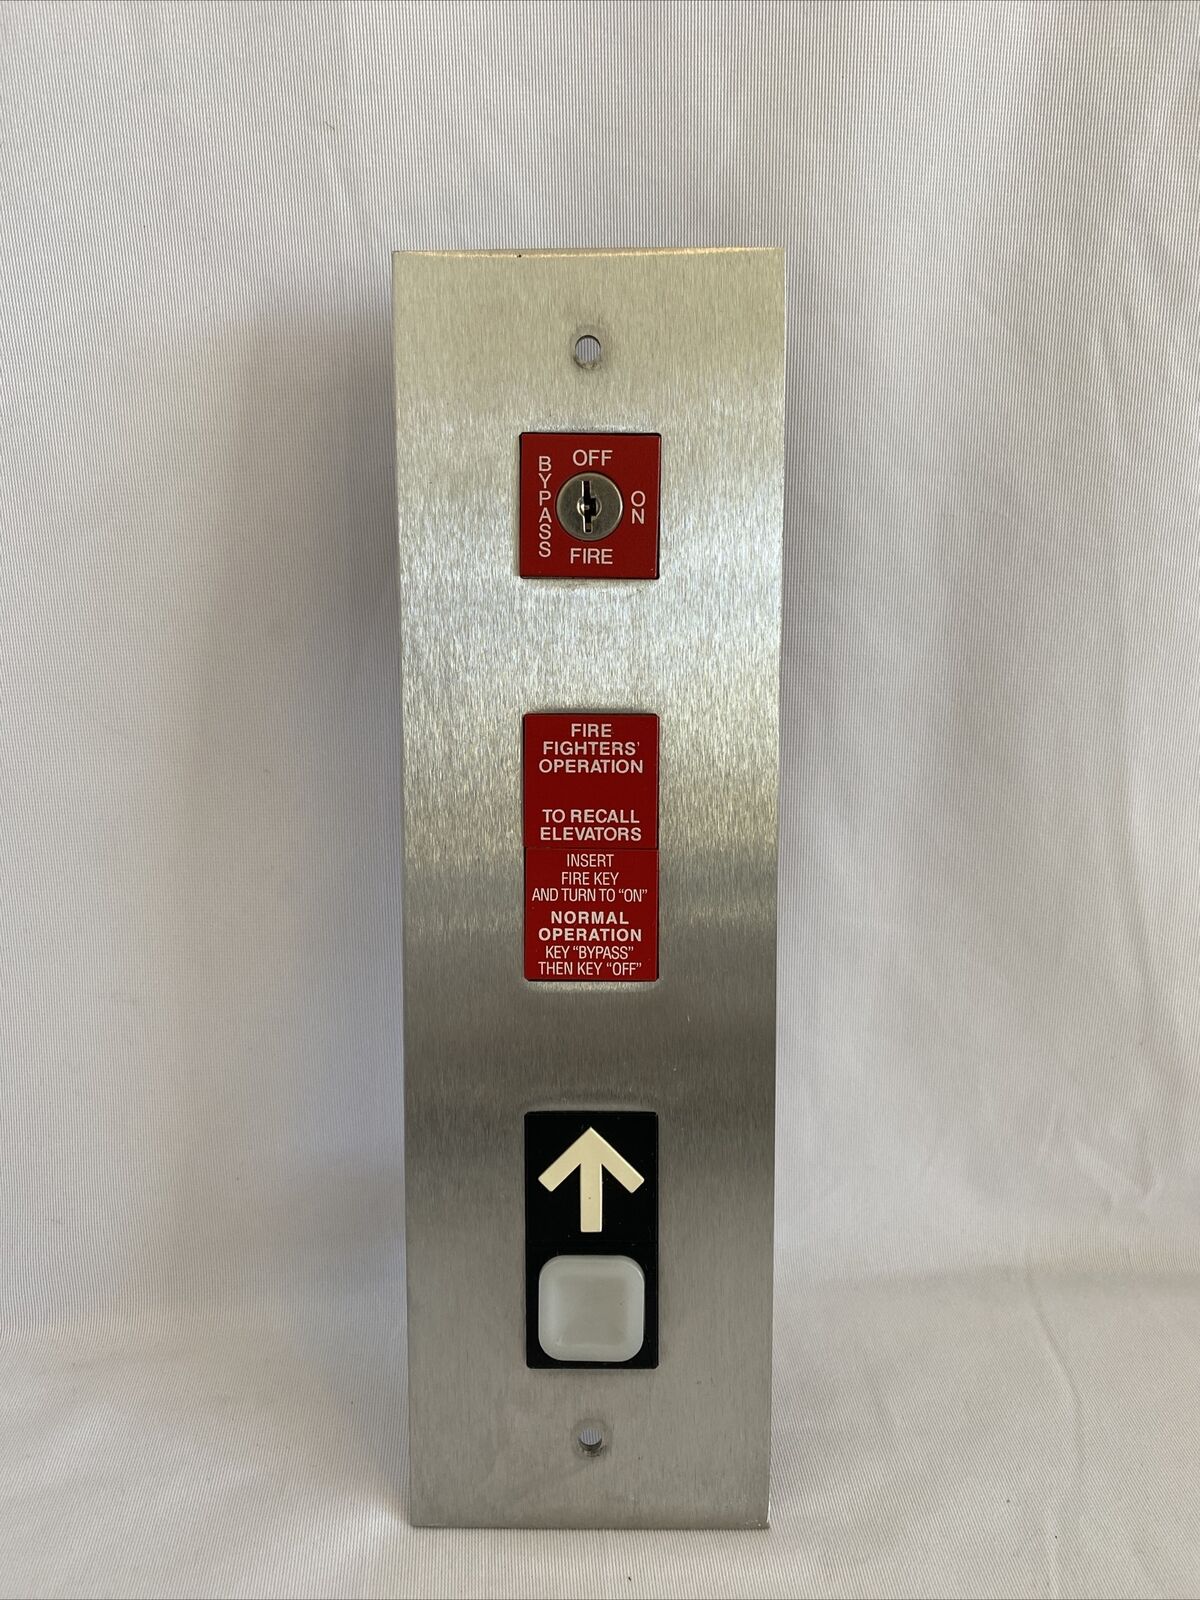 Vintage Dover Impulse Elevator Call Station With Fire Key Switch and Signage